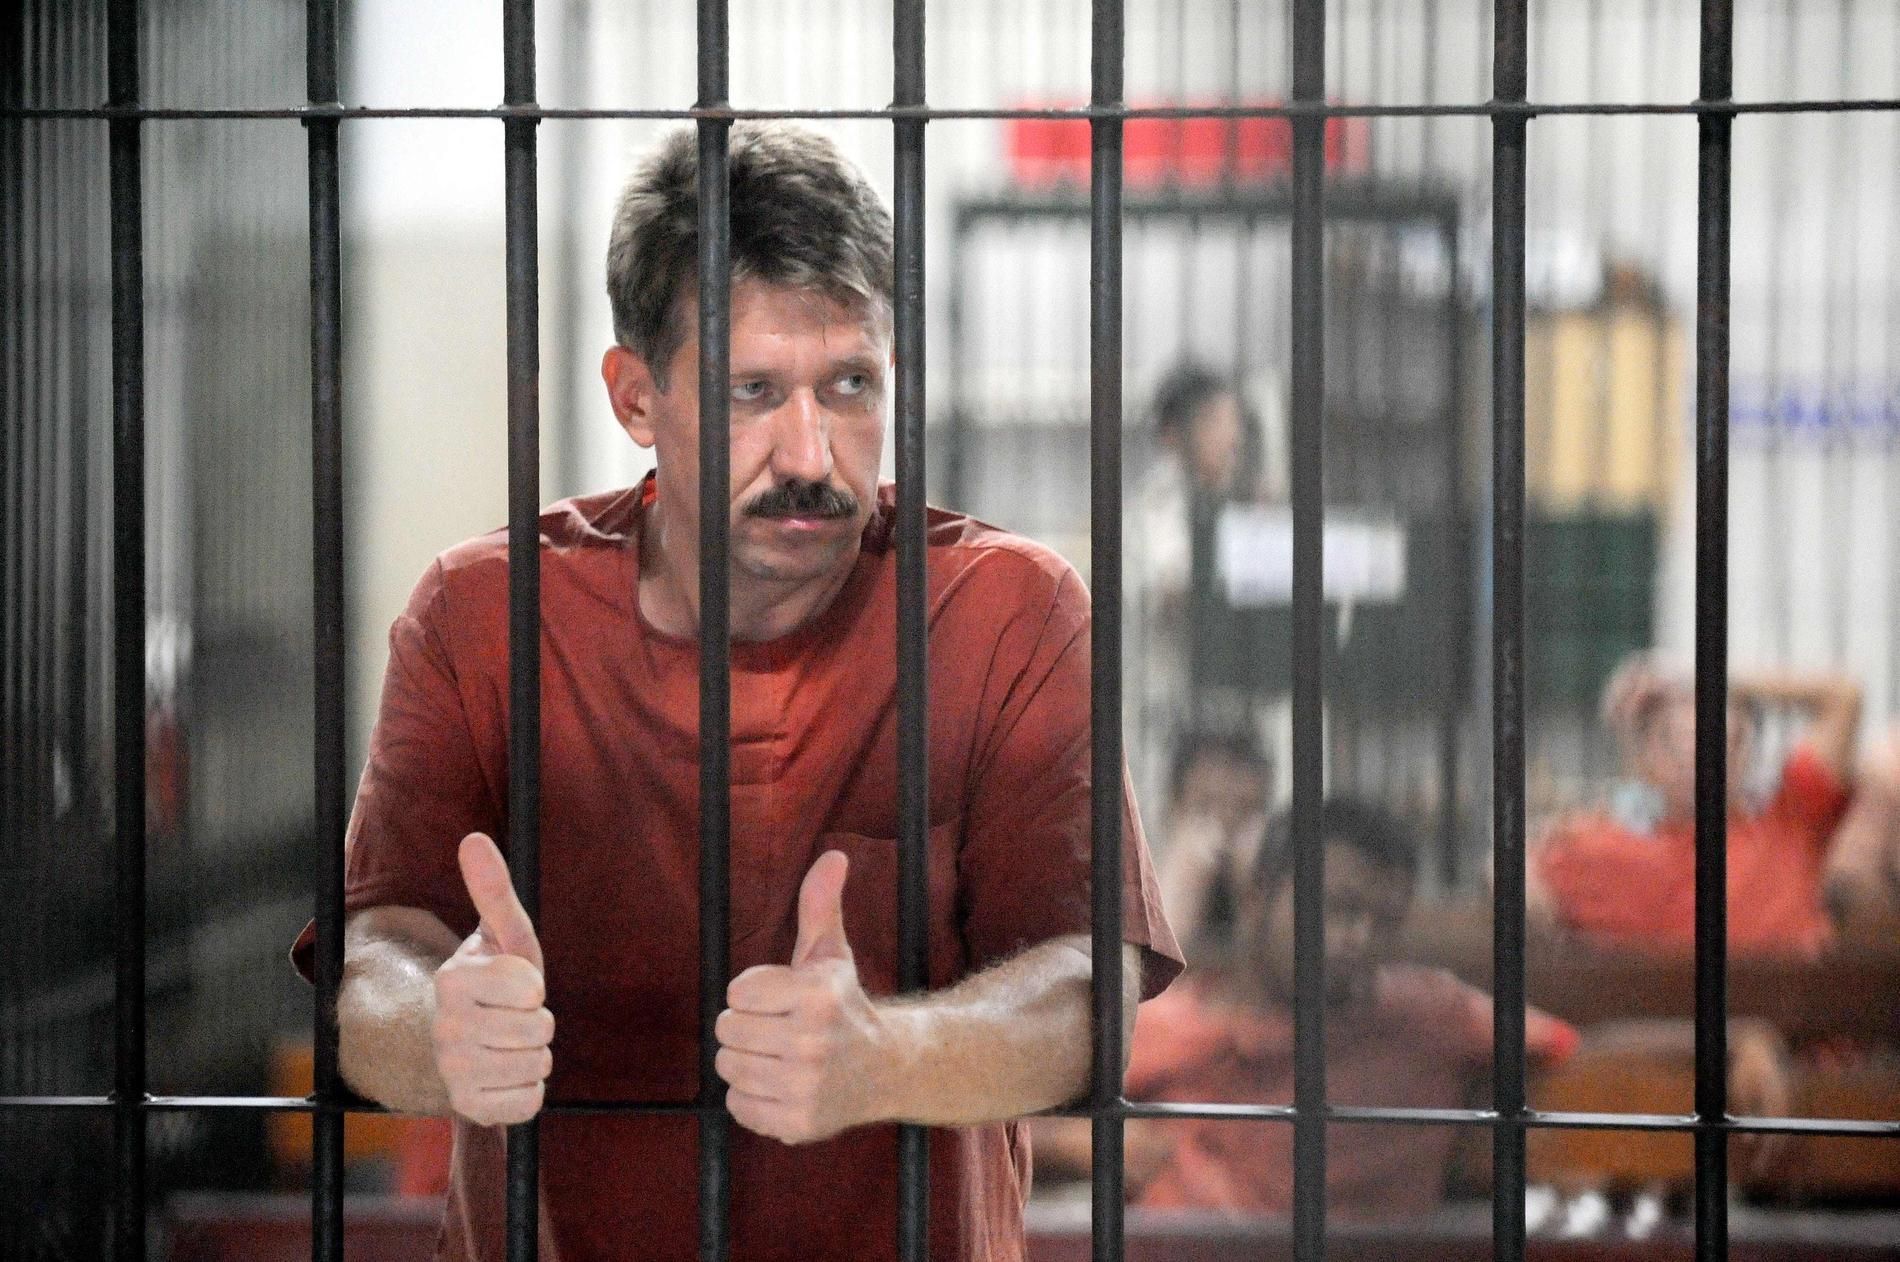 Viktor Bout was arrested at a luxury hotel in Bangkok in 2008 after a stunning US-led operation.  He was later extradited to the United States and sentenced there.  The photo was taken during a court hearing in Thailand in March 2009.